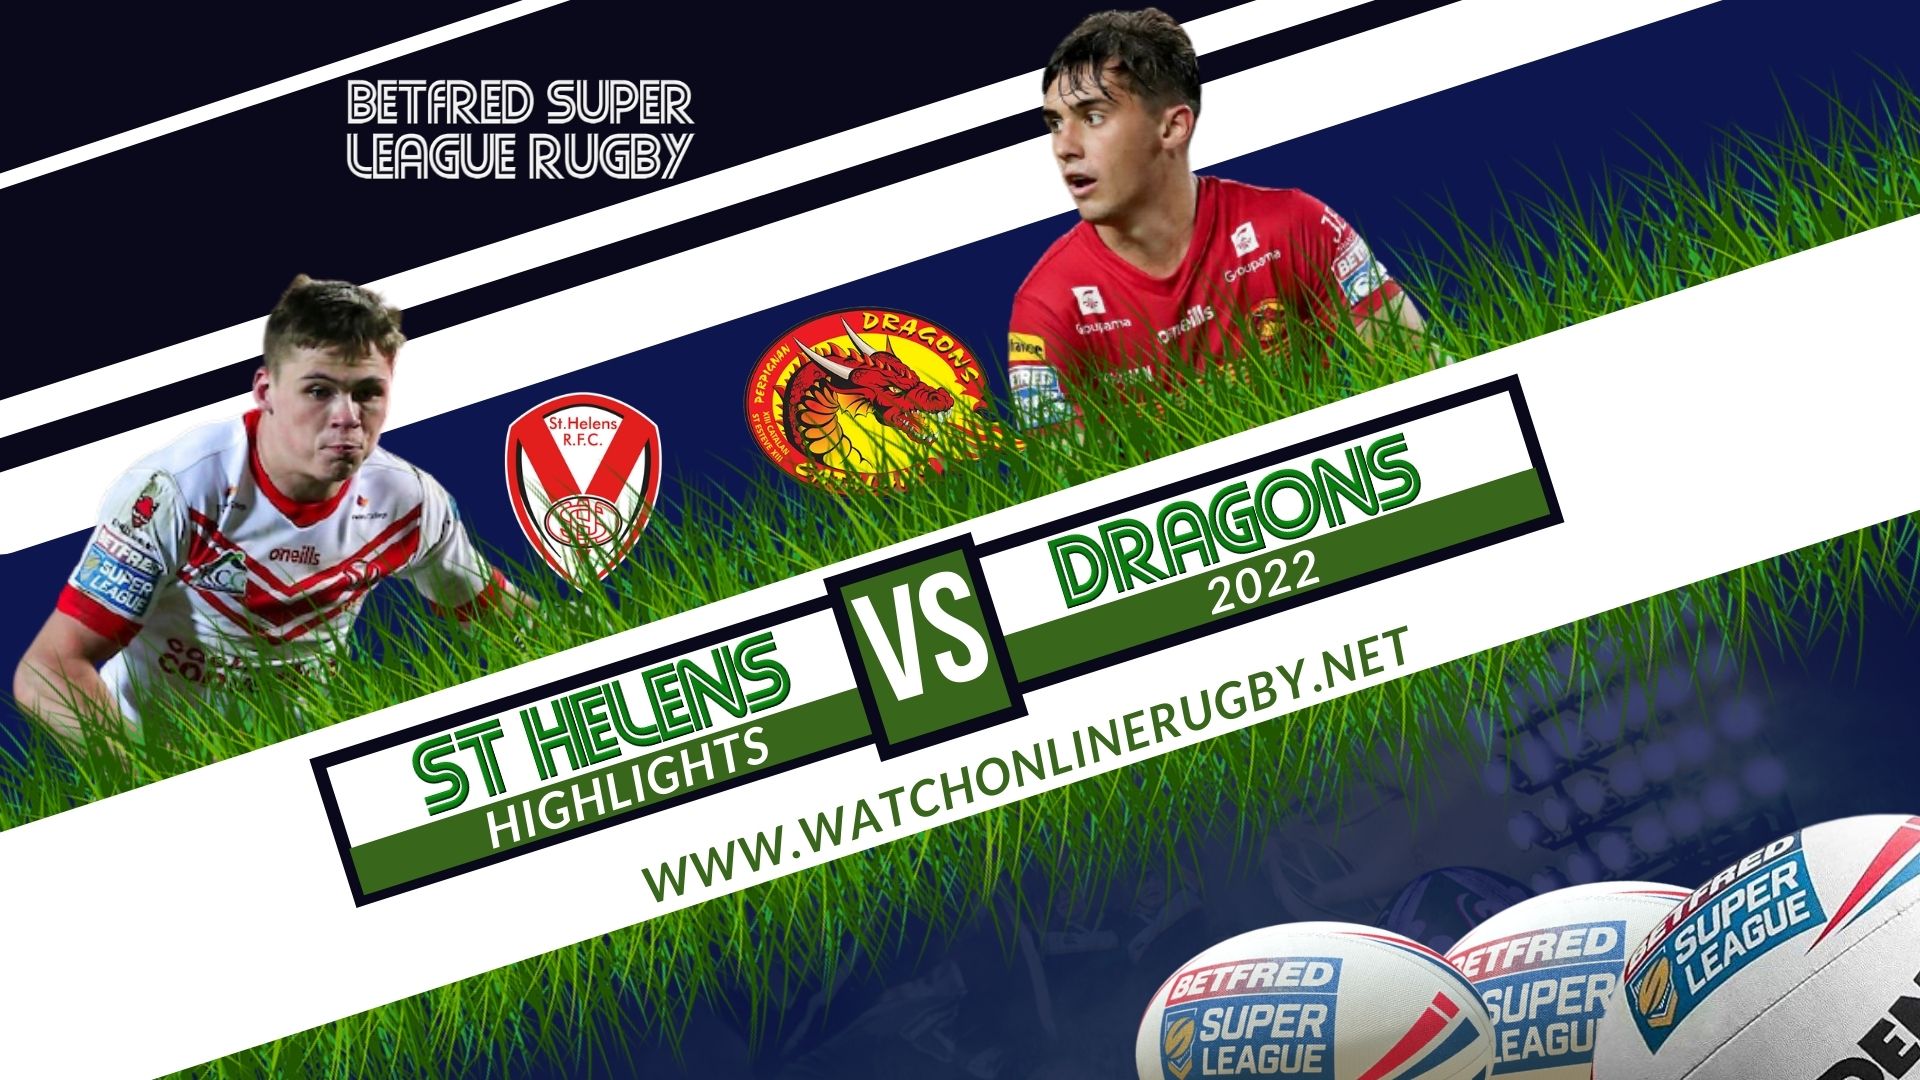 St Helens Vs Catalans Dragons Super League Rugby 2022 RD 1